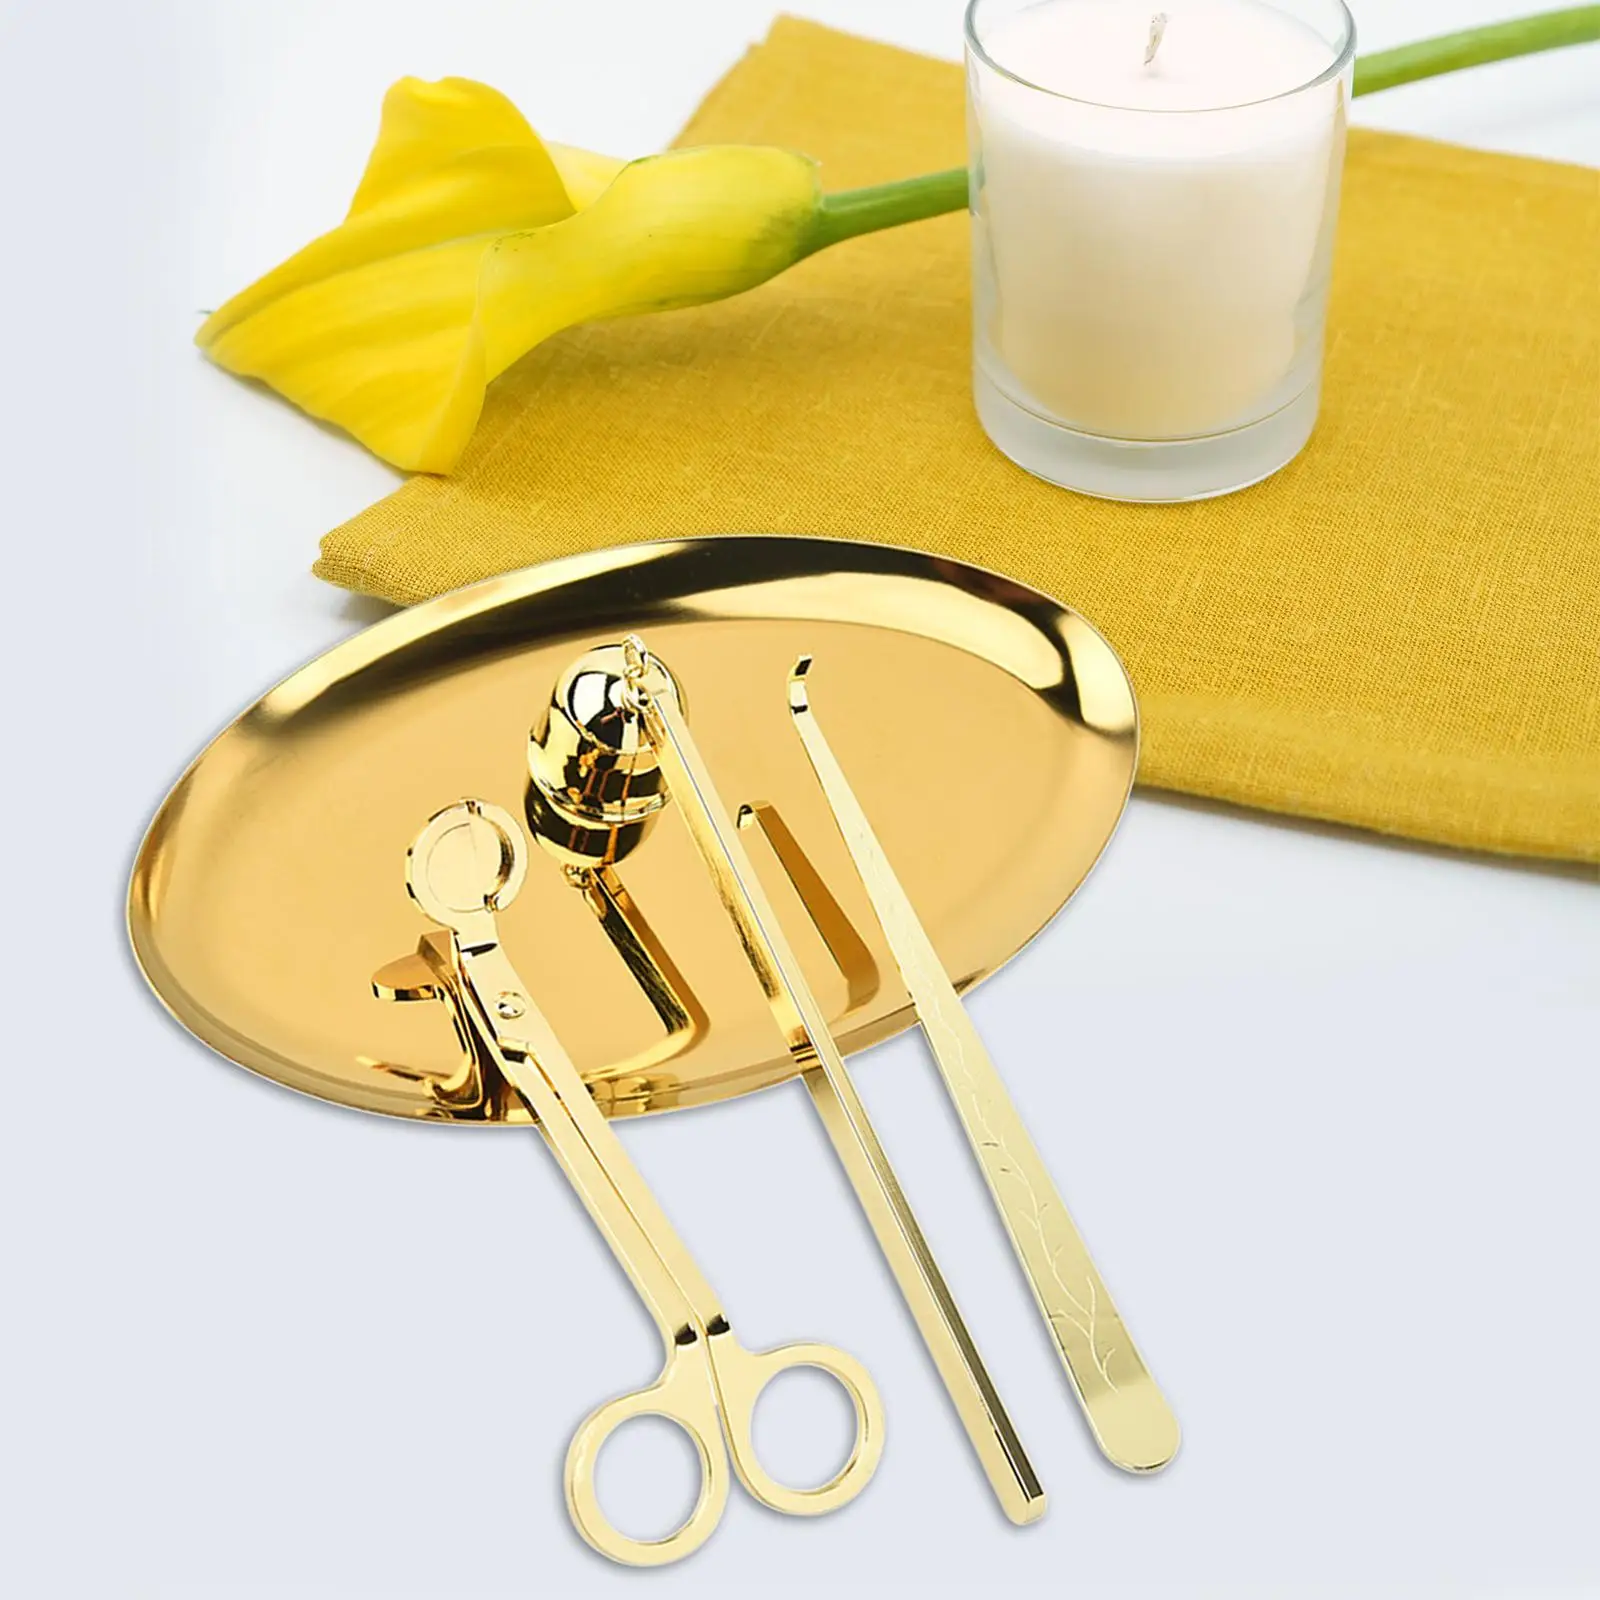 4Pcs Candle Accessories Wick Dipper Cutter Kit with Tray Plate Candle Extinguisher for Thanksgiving Christmas Versatile